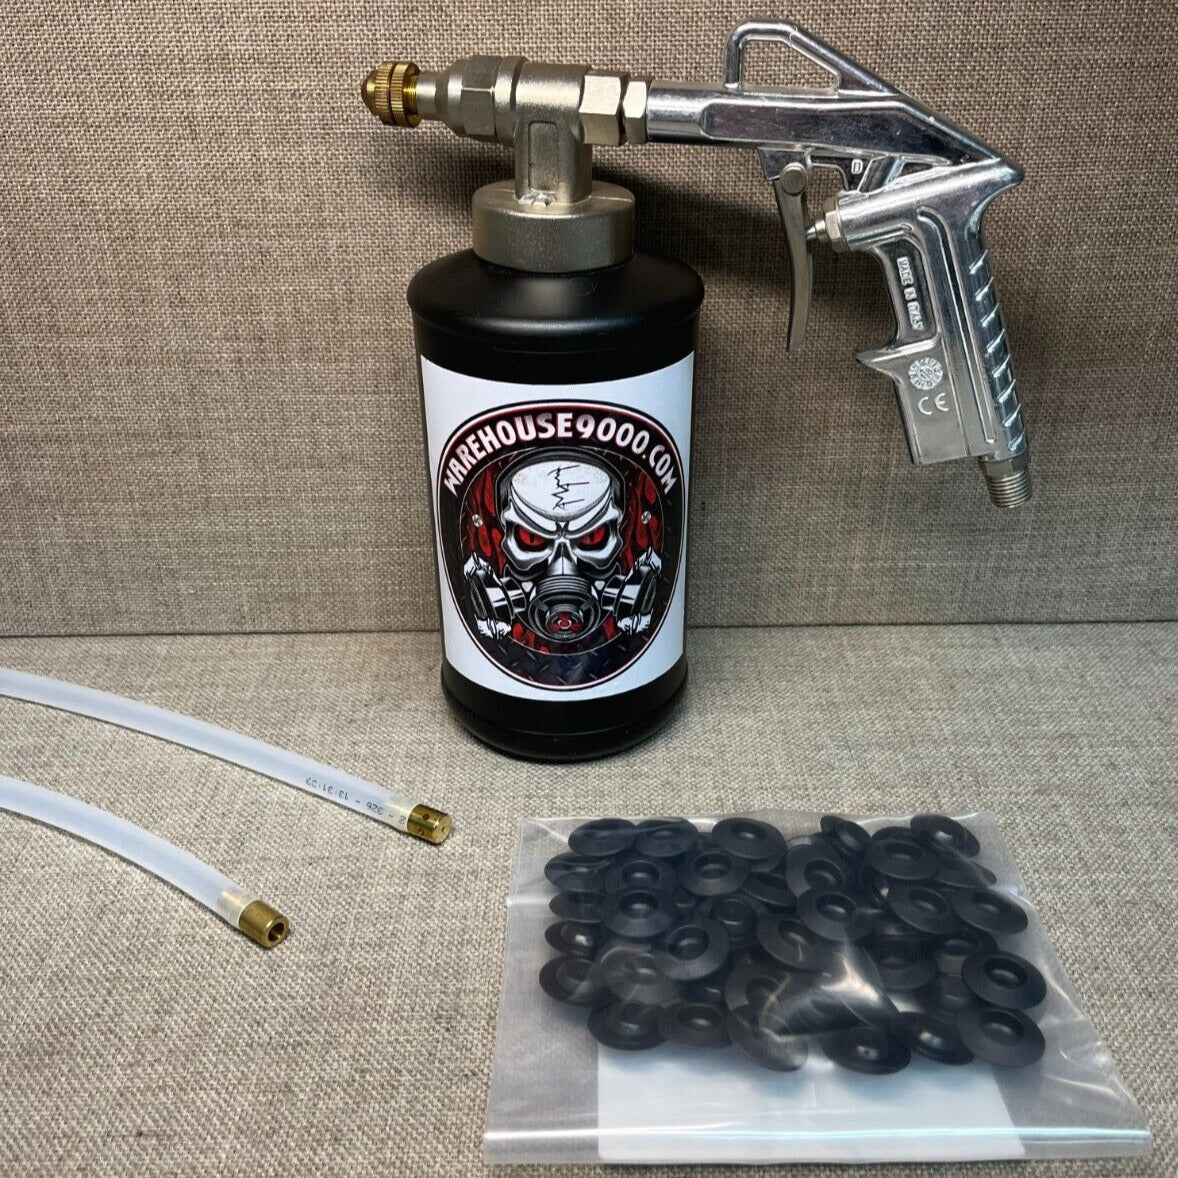 Pro Undercoating Spray Gun with 2 Wands, 1 Quart Bottle, and 50 Rust Plugs